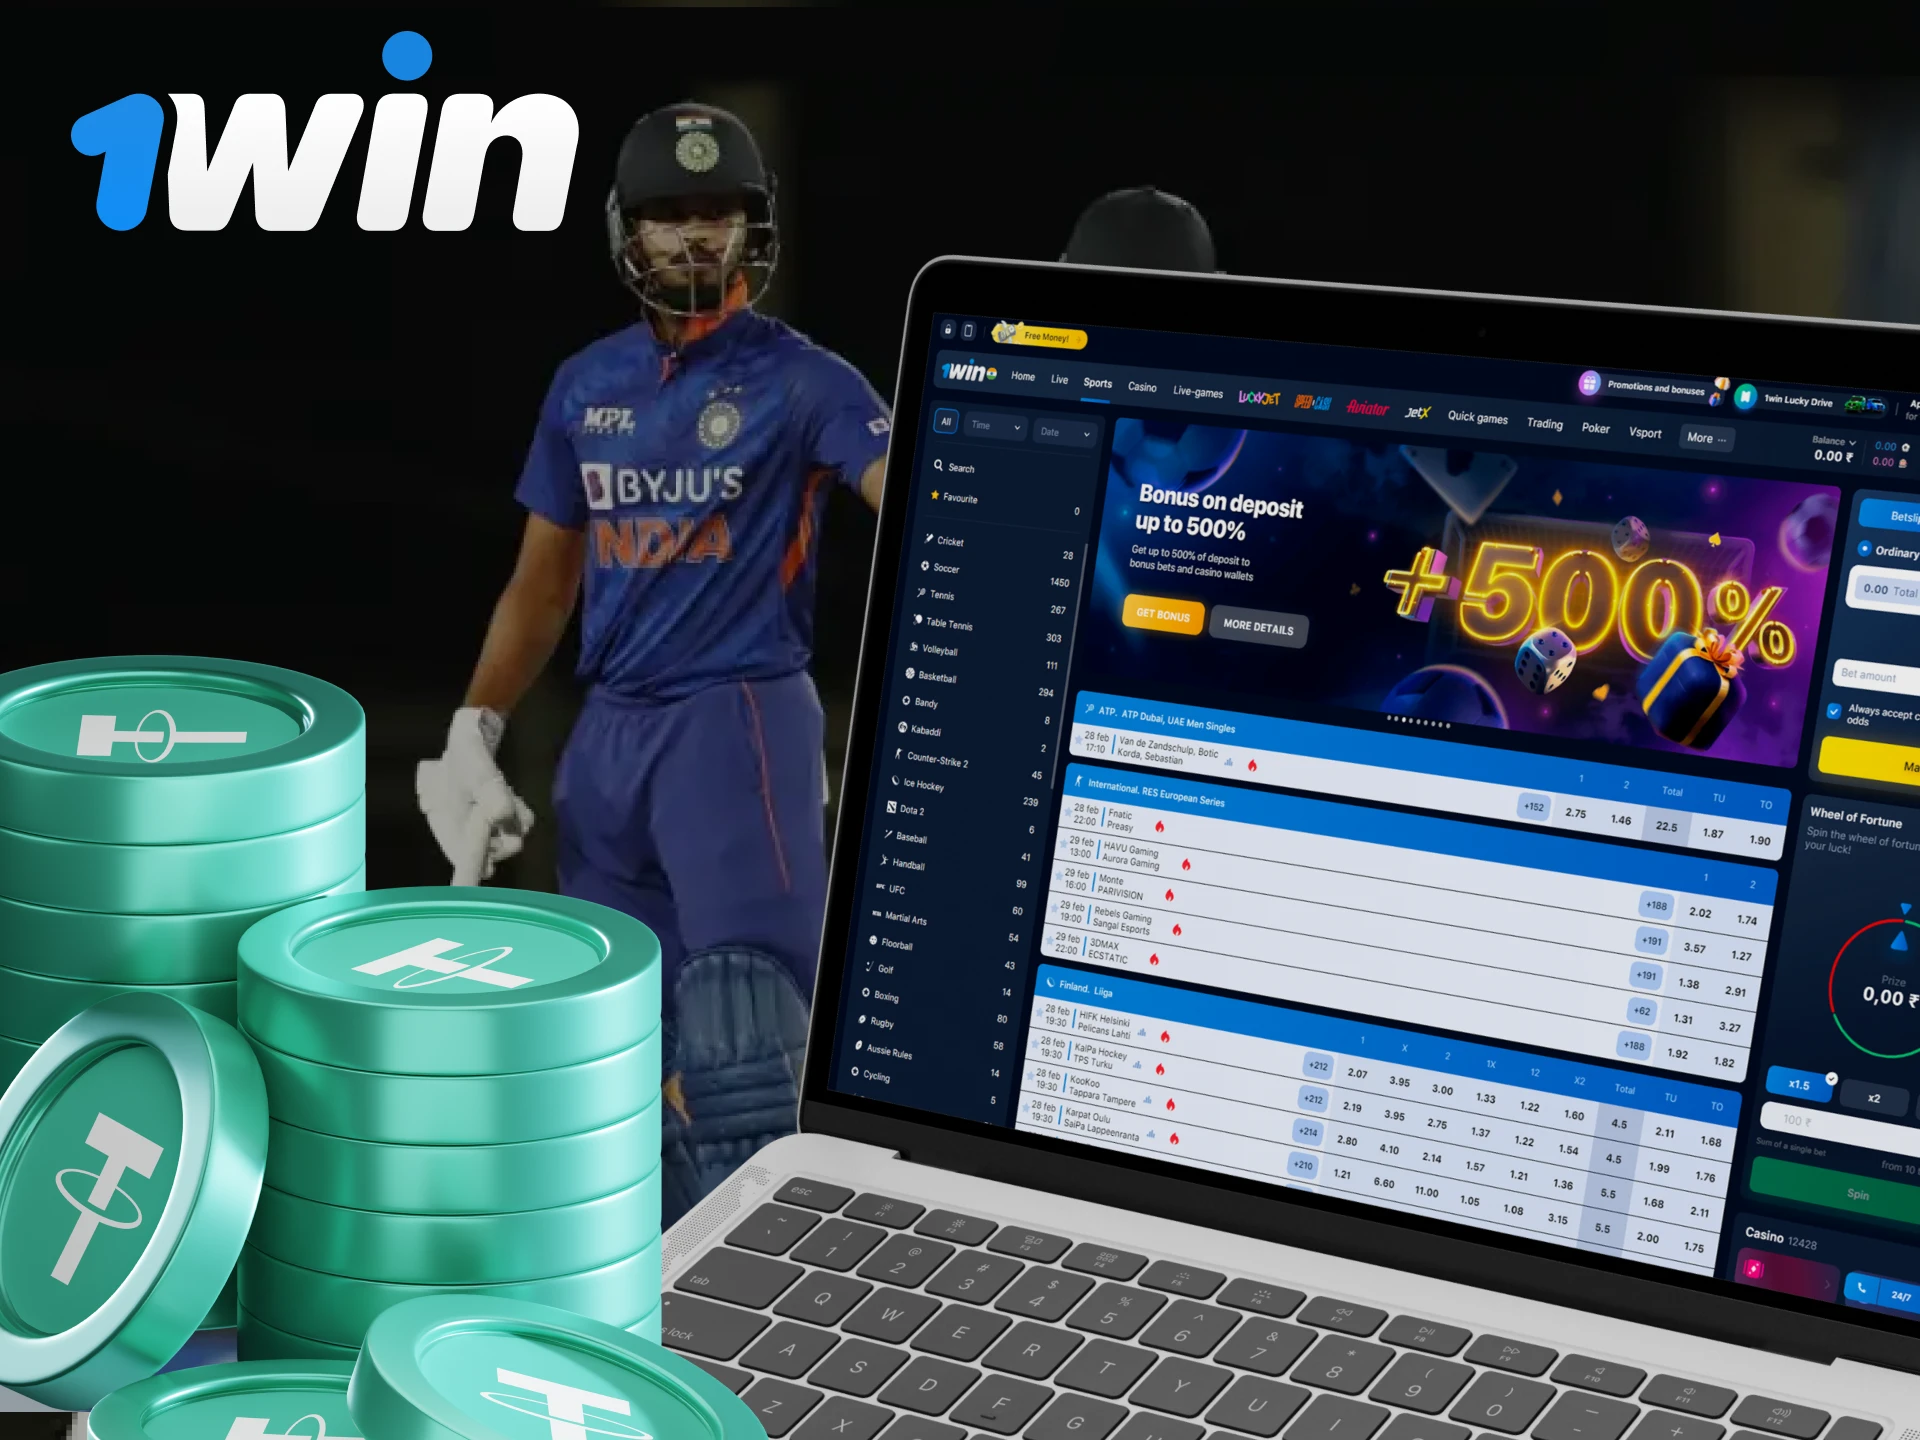 1win offers a variety of cryptocurrencies for sports betting.